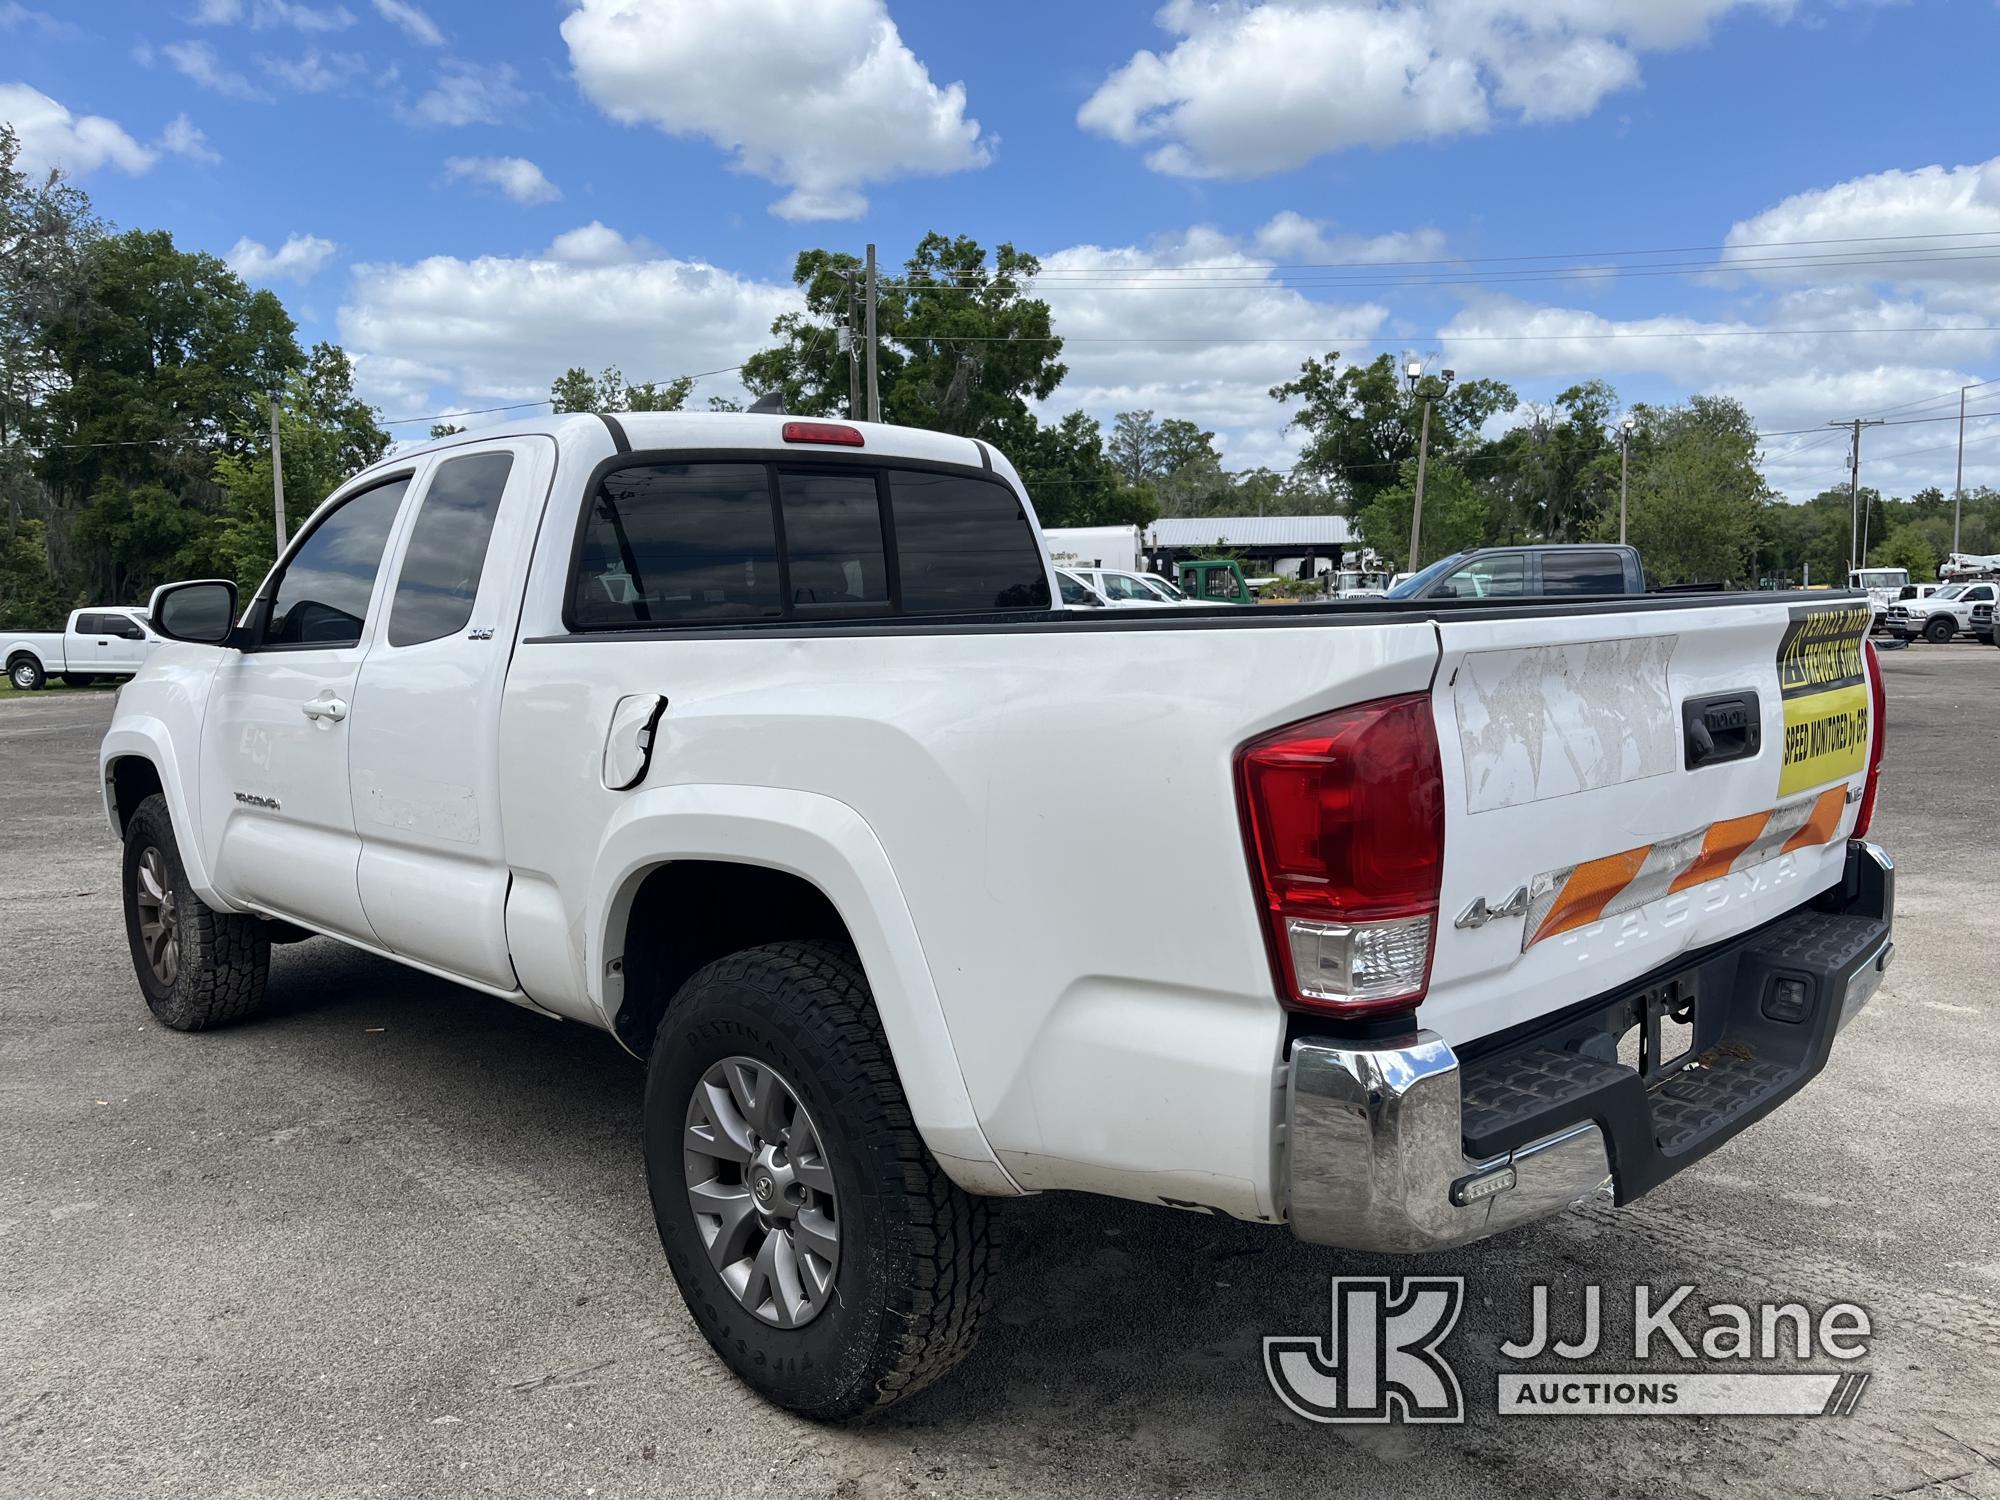 (Tampa, FL) 2017 Toyota Tacoma 4x4 Extended-Cab Pickup Truck Runs & Moves)(Paint & Body Damage